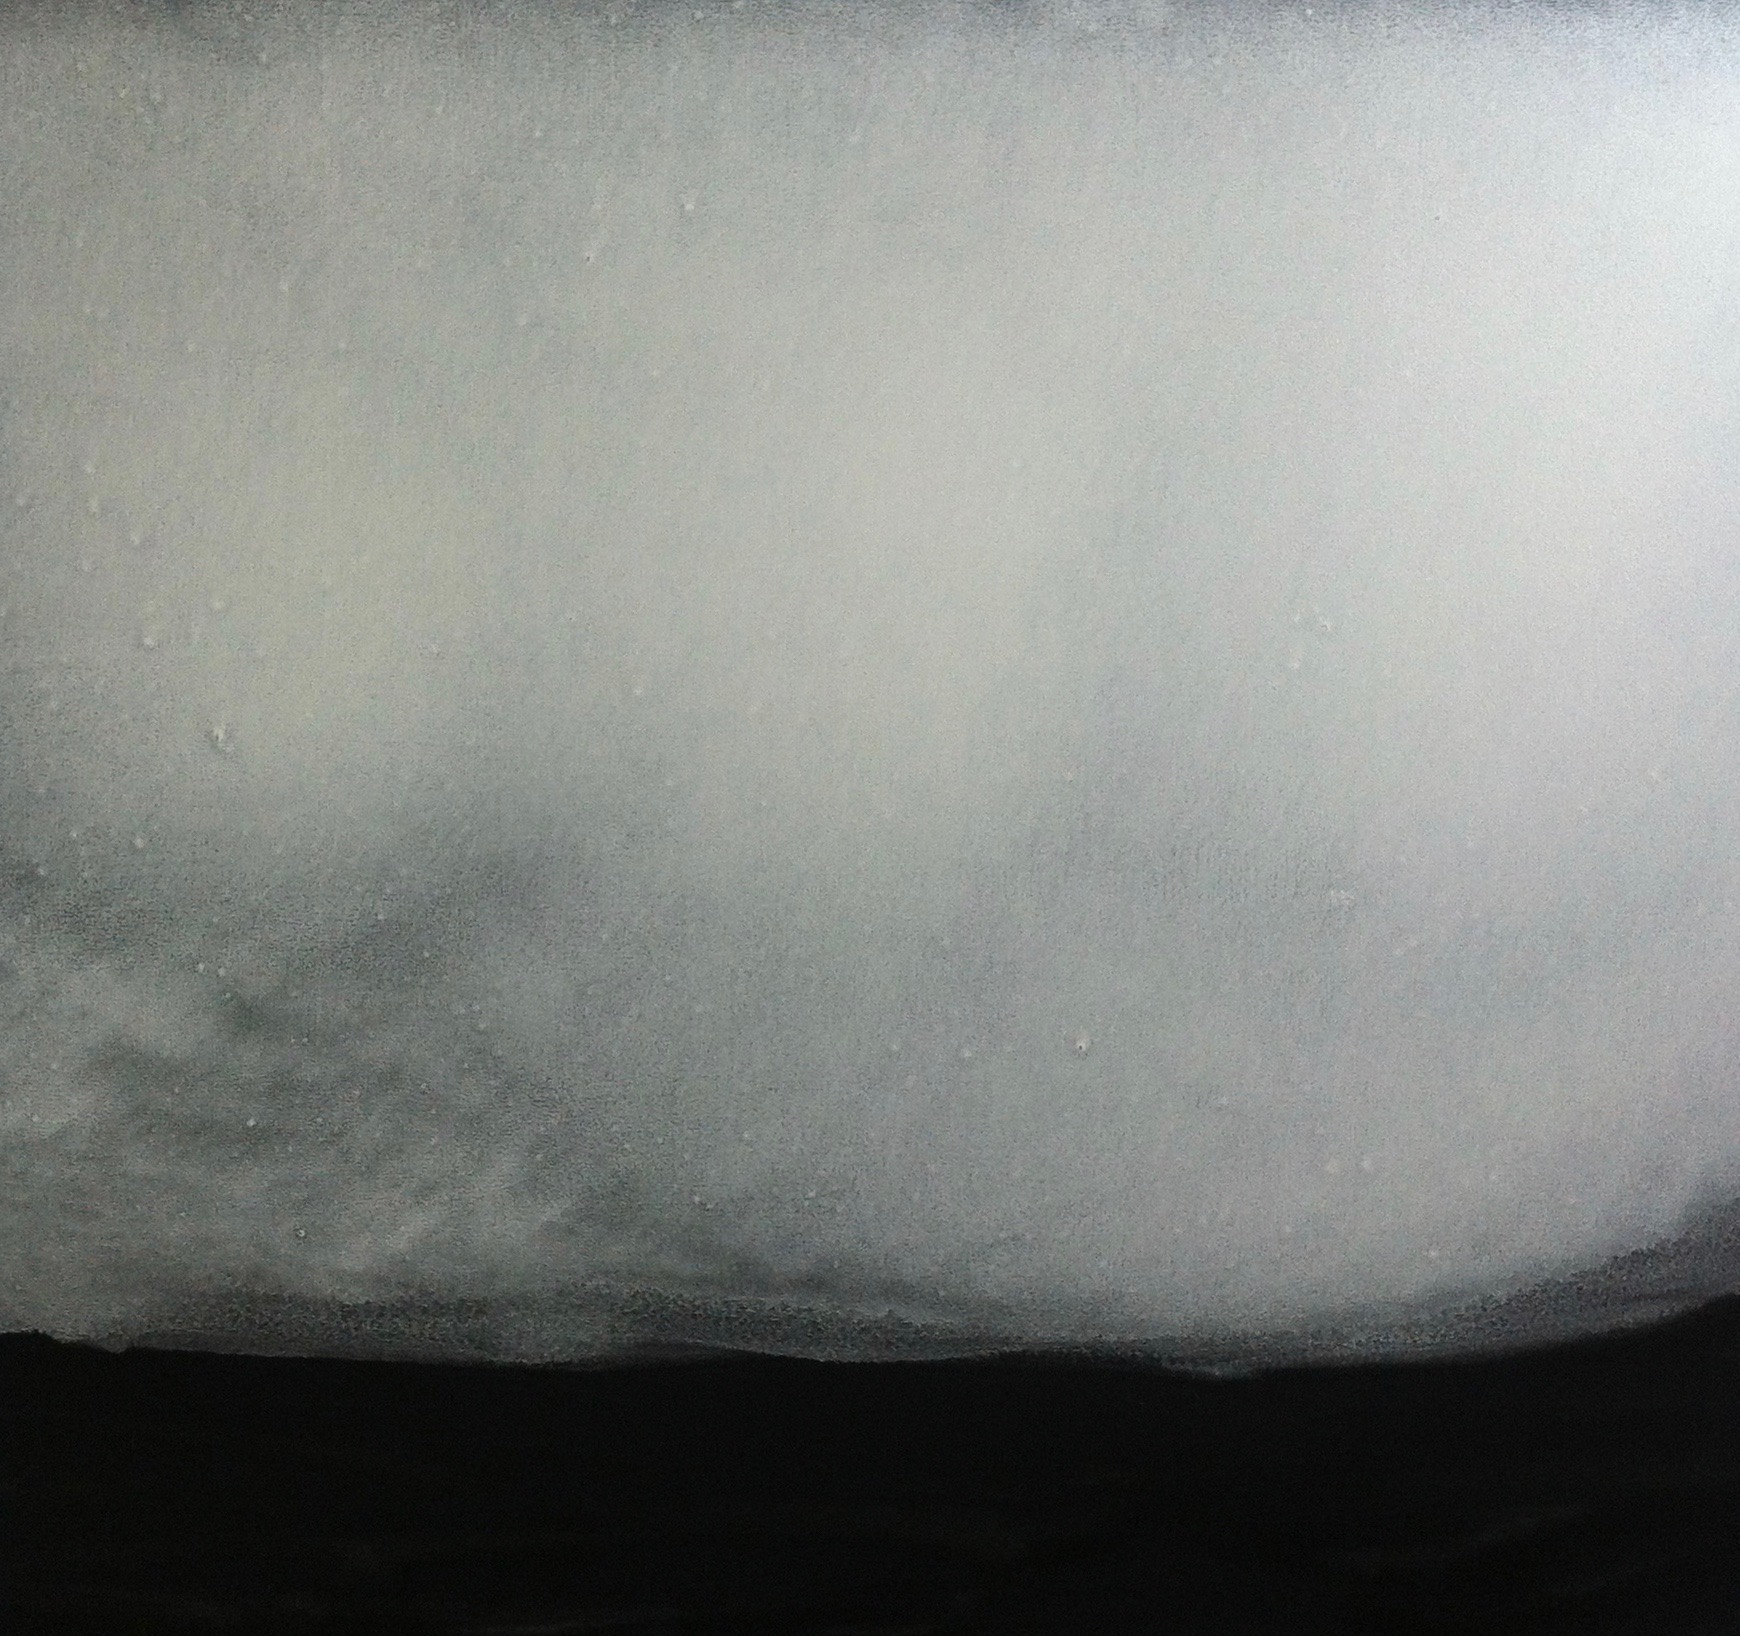  Untitled (White), 2013. Oil on Paper, 30 x 31 inches.  